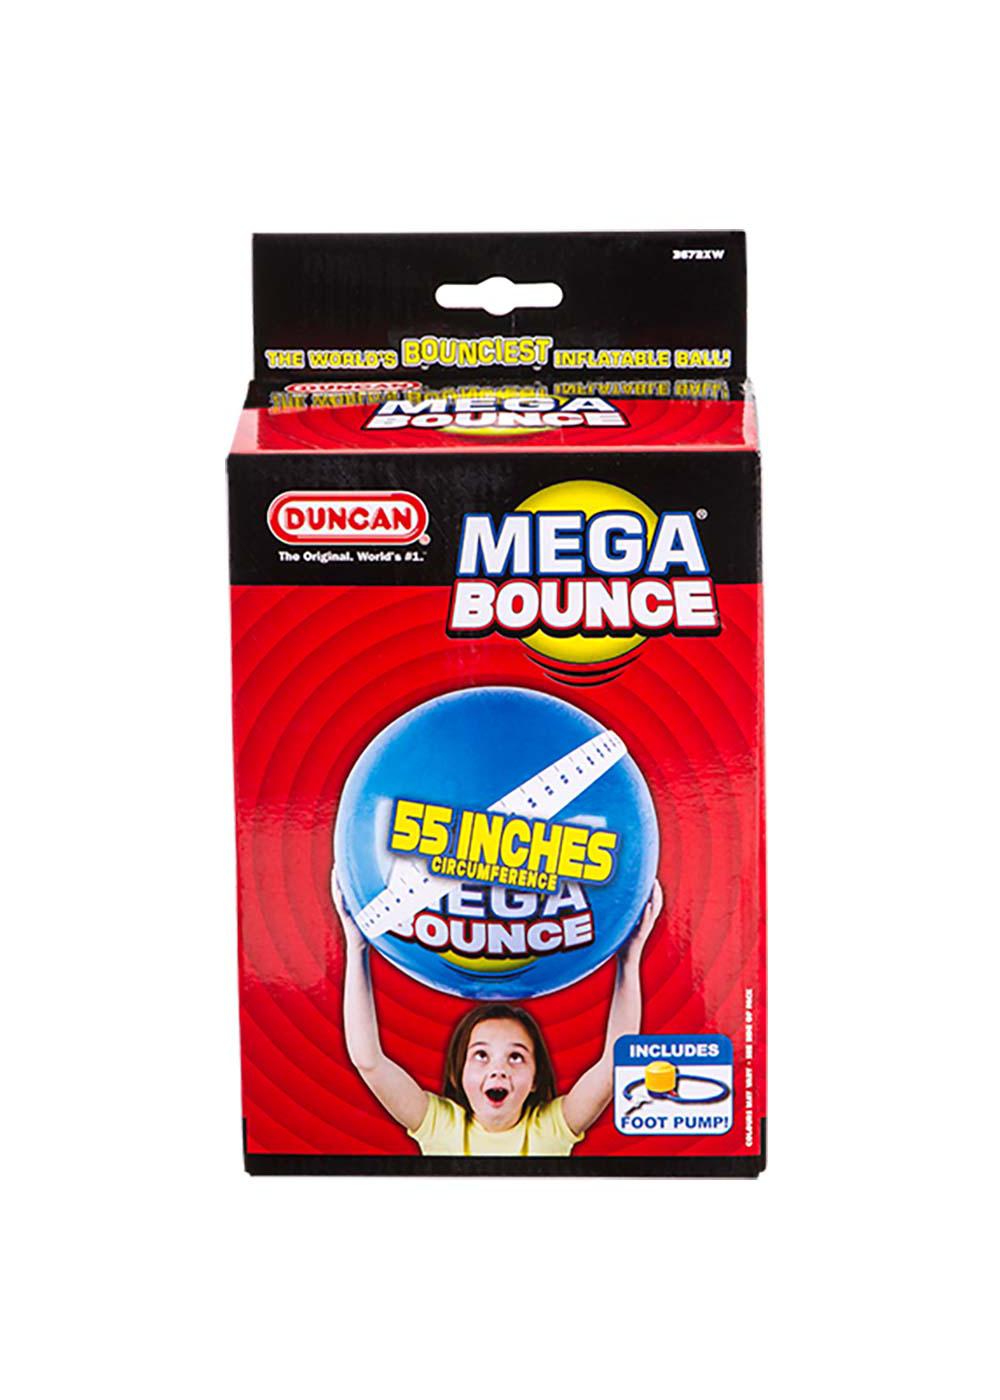 Duncan Mega Bounce Ball, Assorted; image 2 of 3